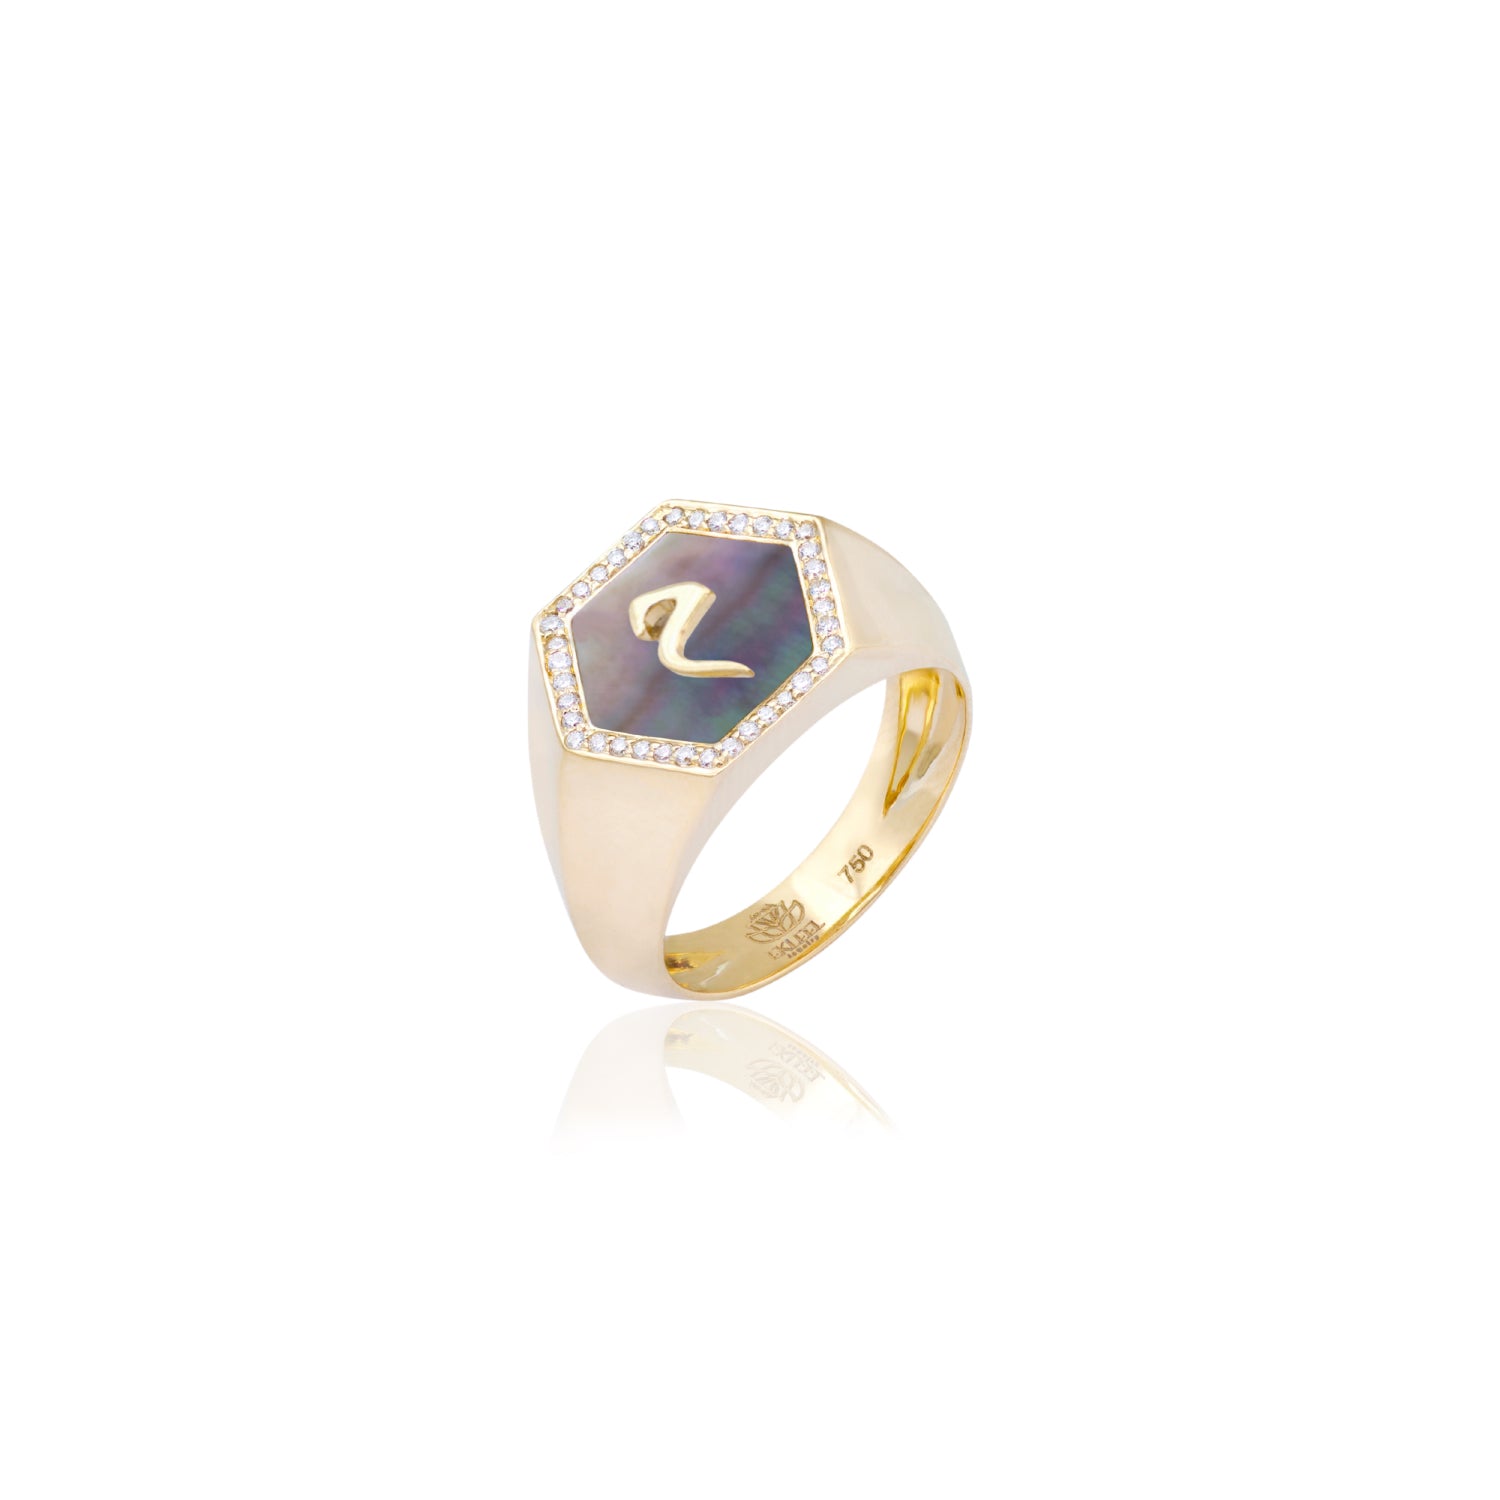 Qamoos 2.0 Letter م Black Mother of Pearl and Diamond Signet Ring in Yellow Gold